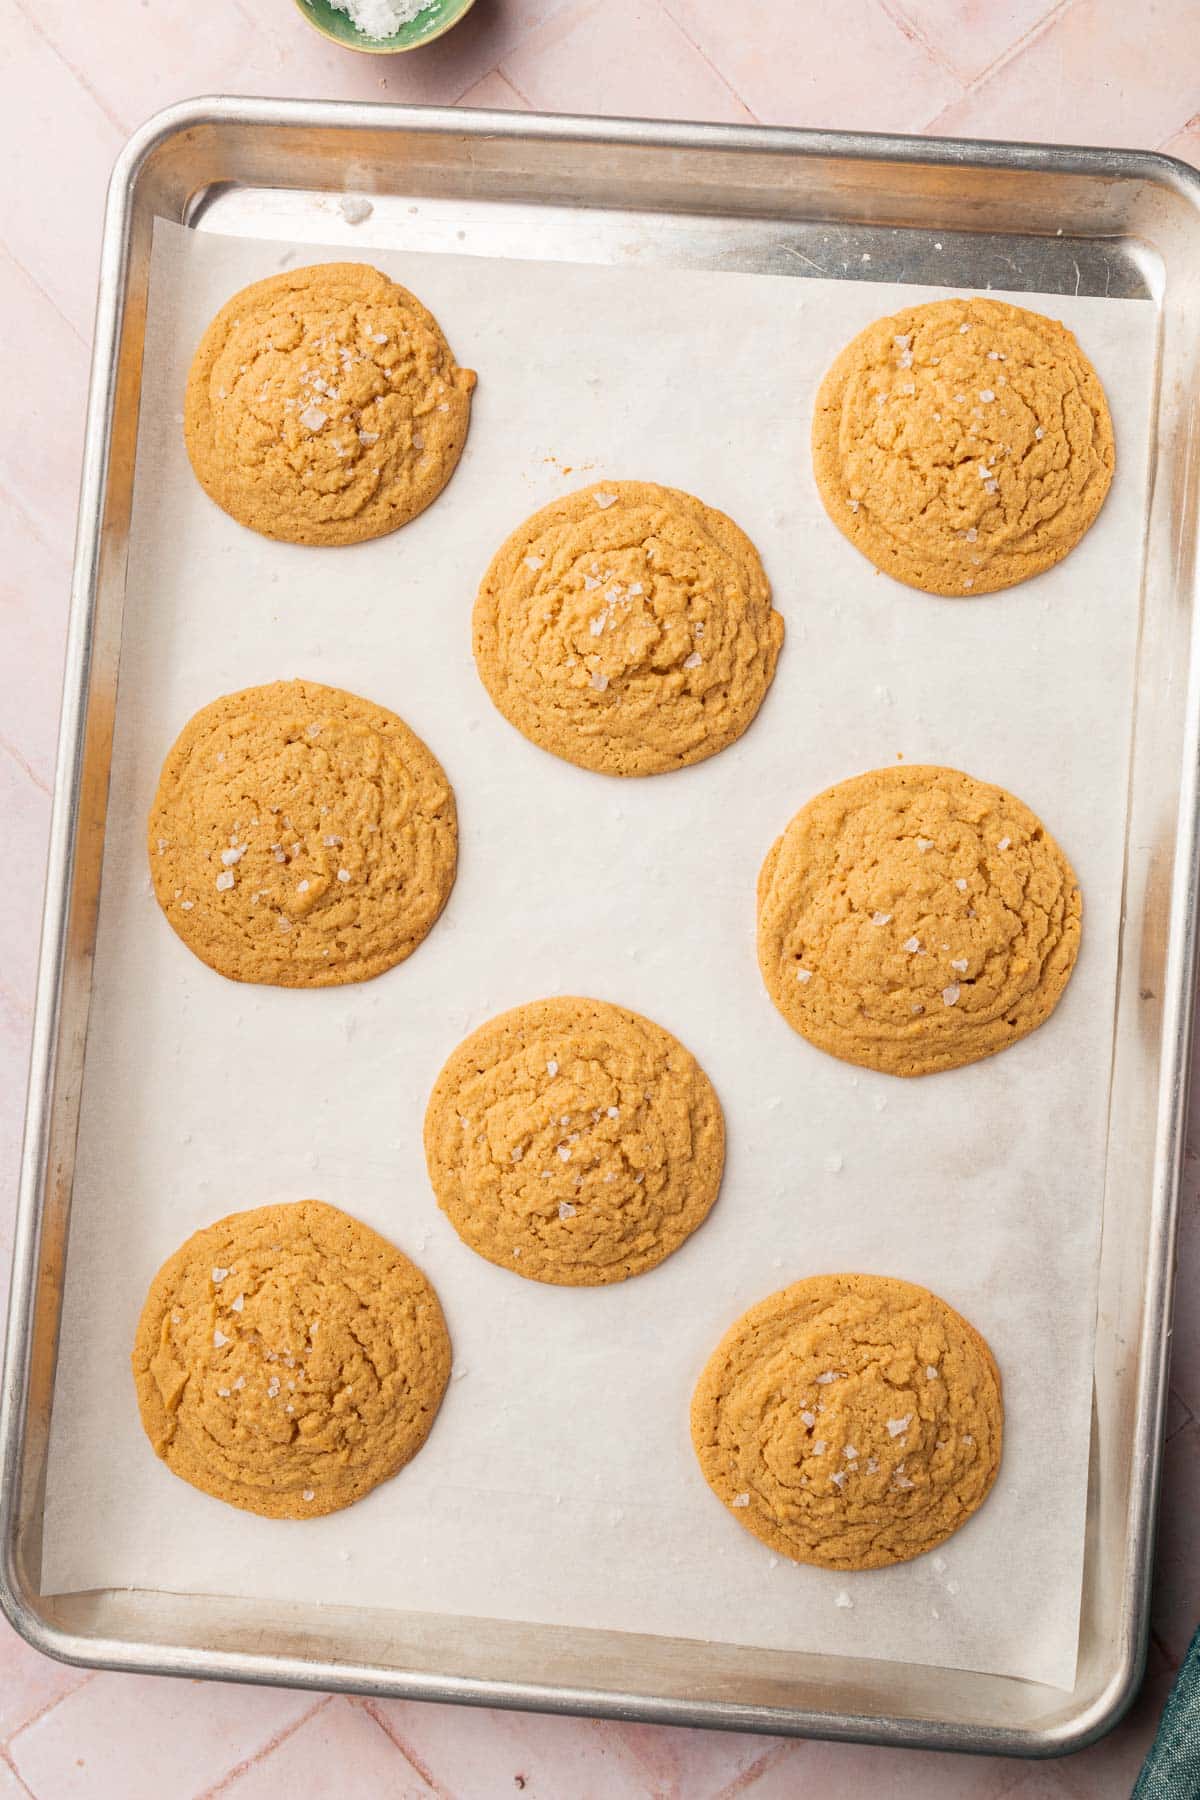 Eight gluten-free peanut butter cookies on a baking sheet lined with parchment paper.